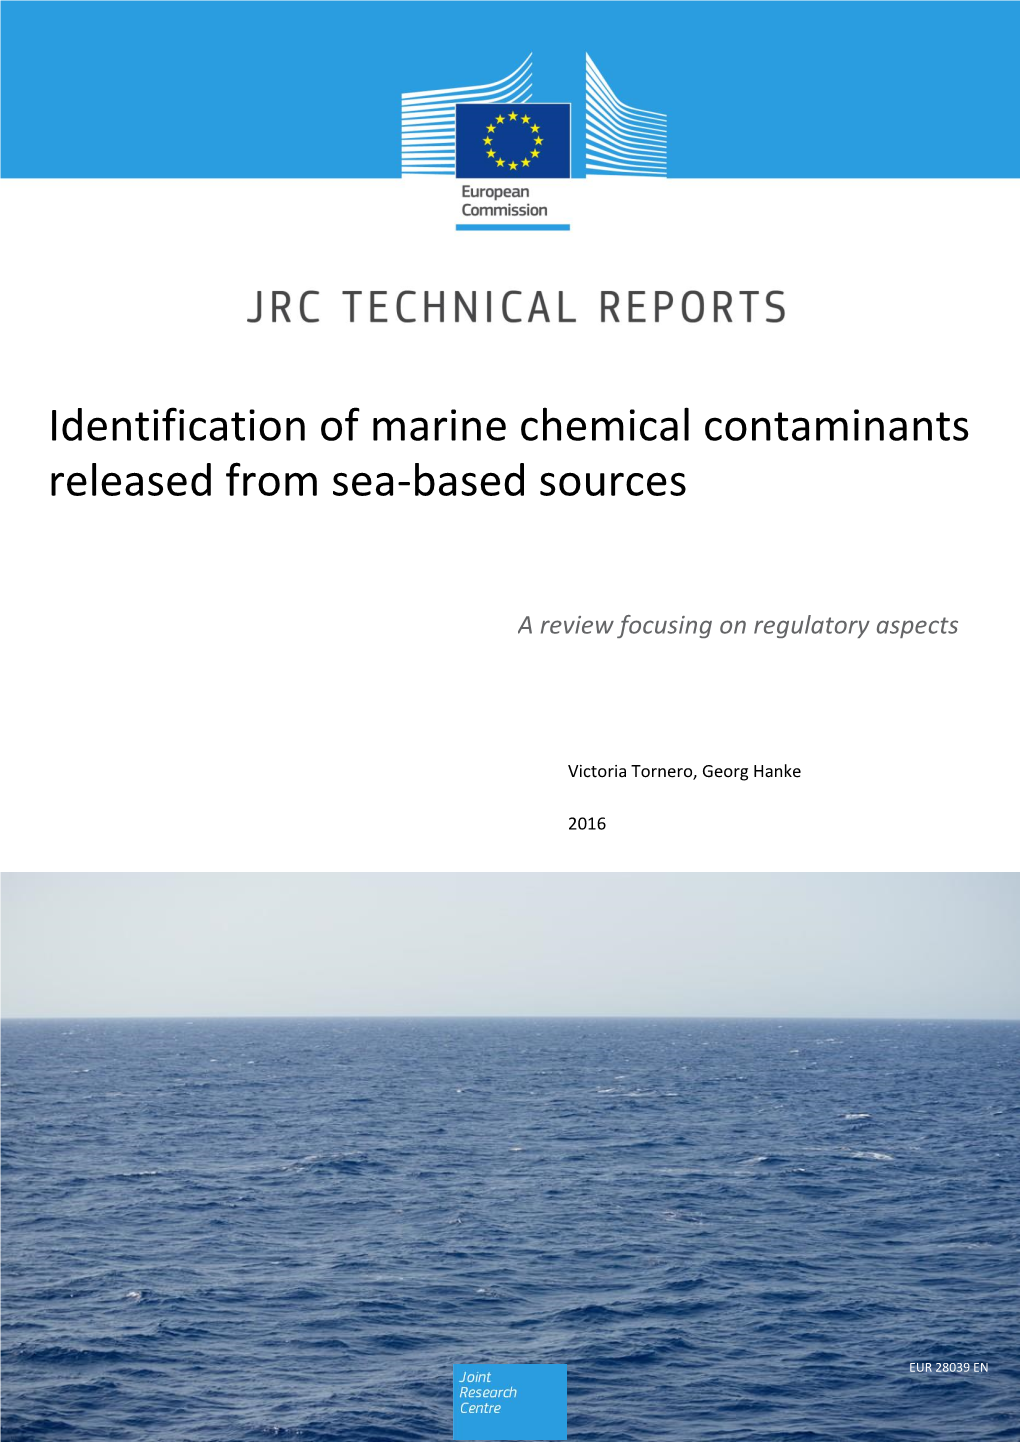 Identification of Marine Chemical Contaminants Released from Sea-Based Sources